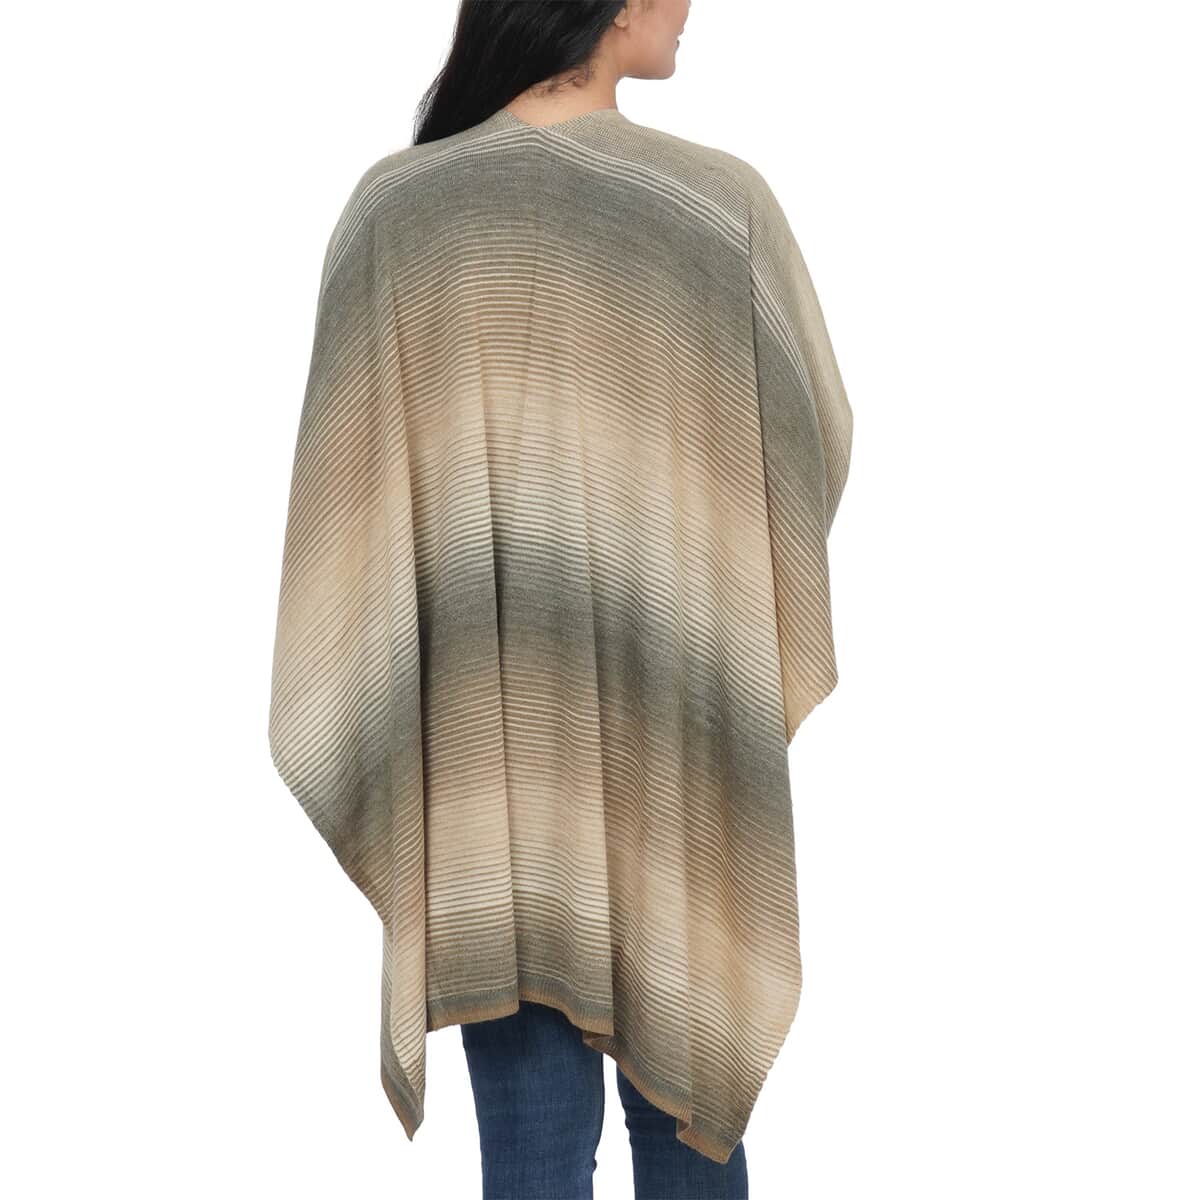 Beige Knitted Stripe Pattern Ruana (One Size Fits Most, 100% Acrylic) image number 2